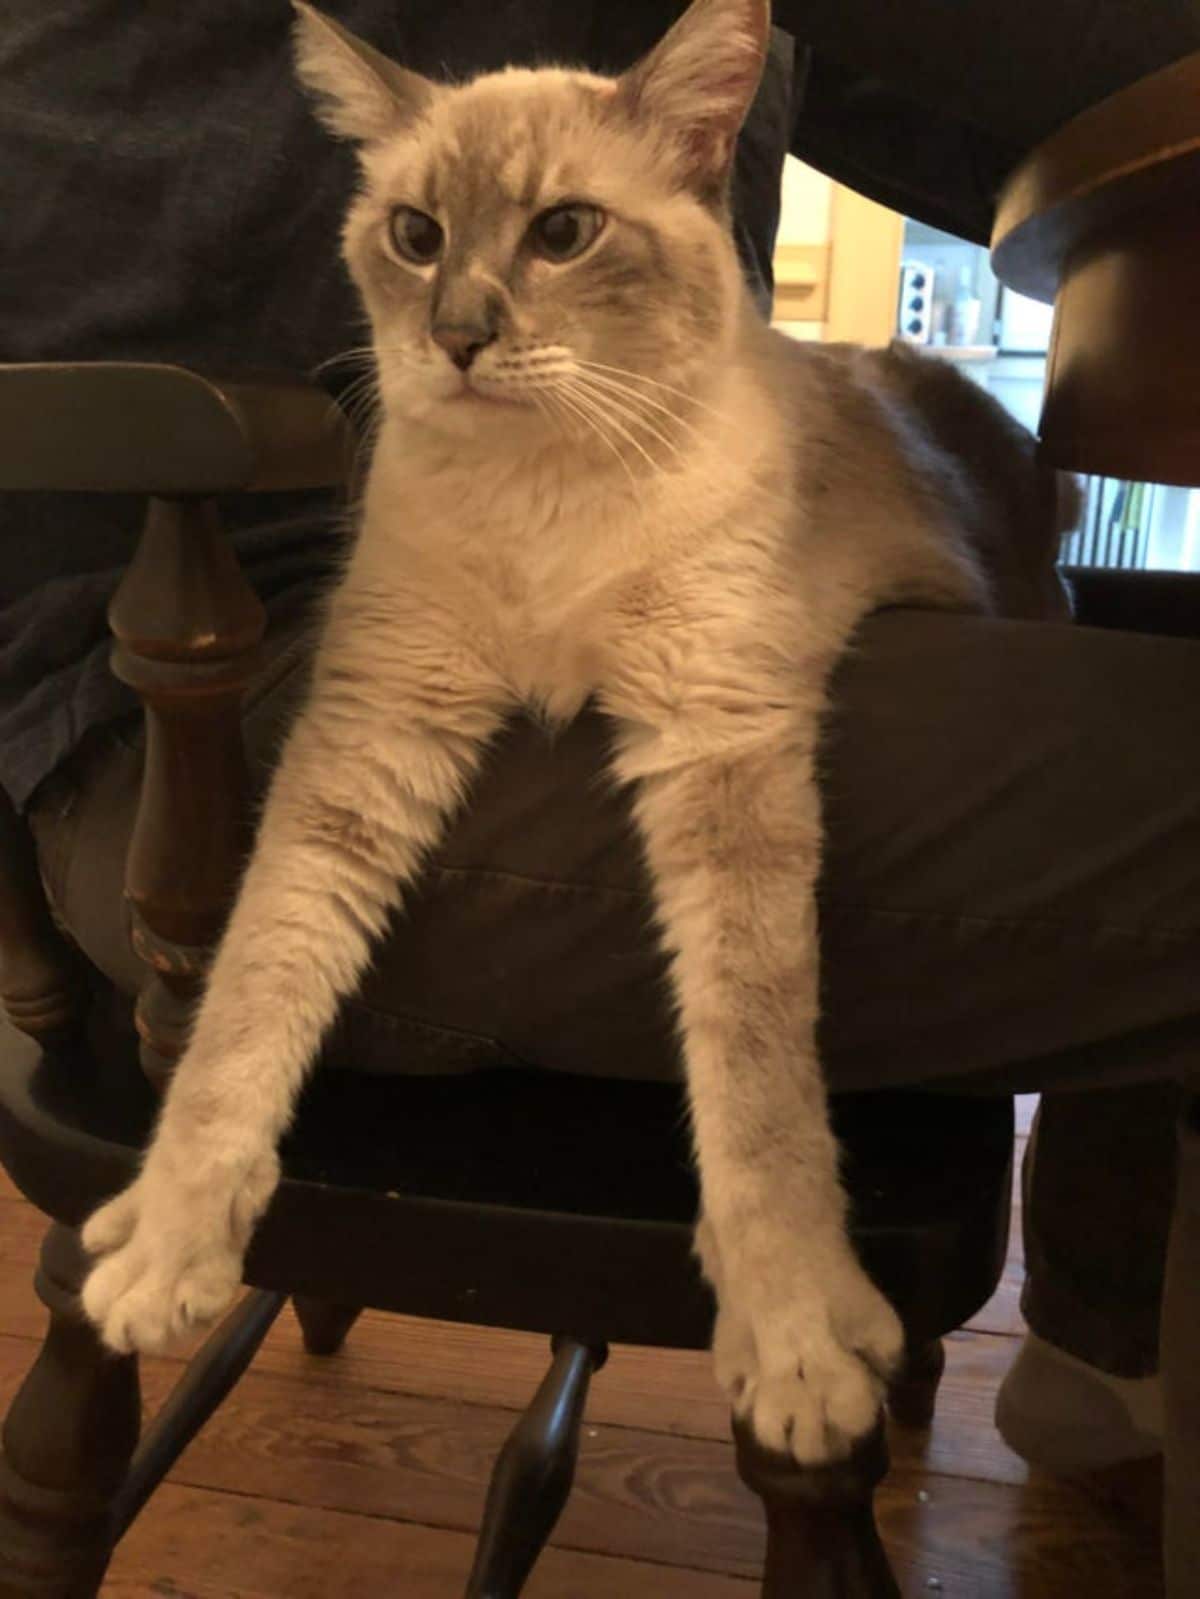 cat laying on a couch with the front legs dangling off the armrest